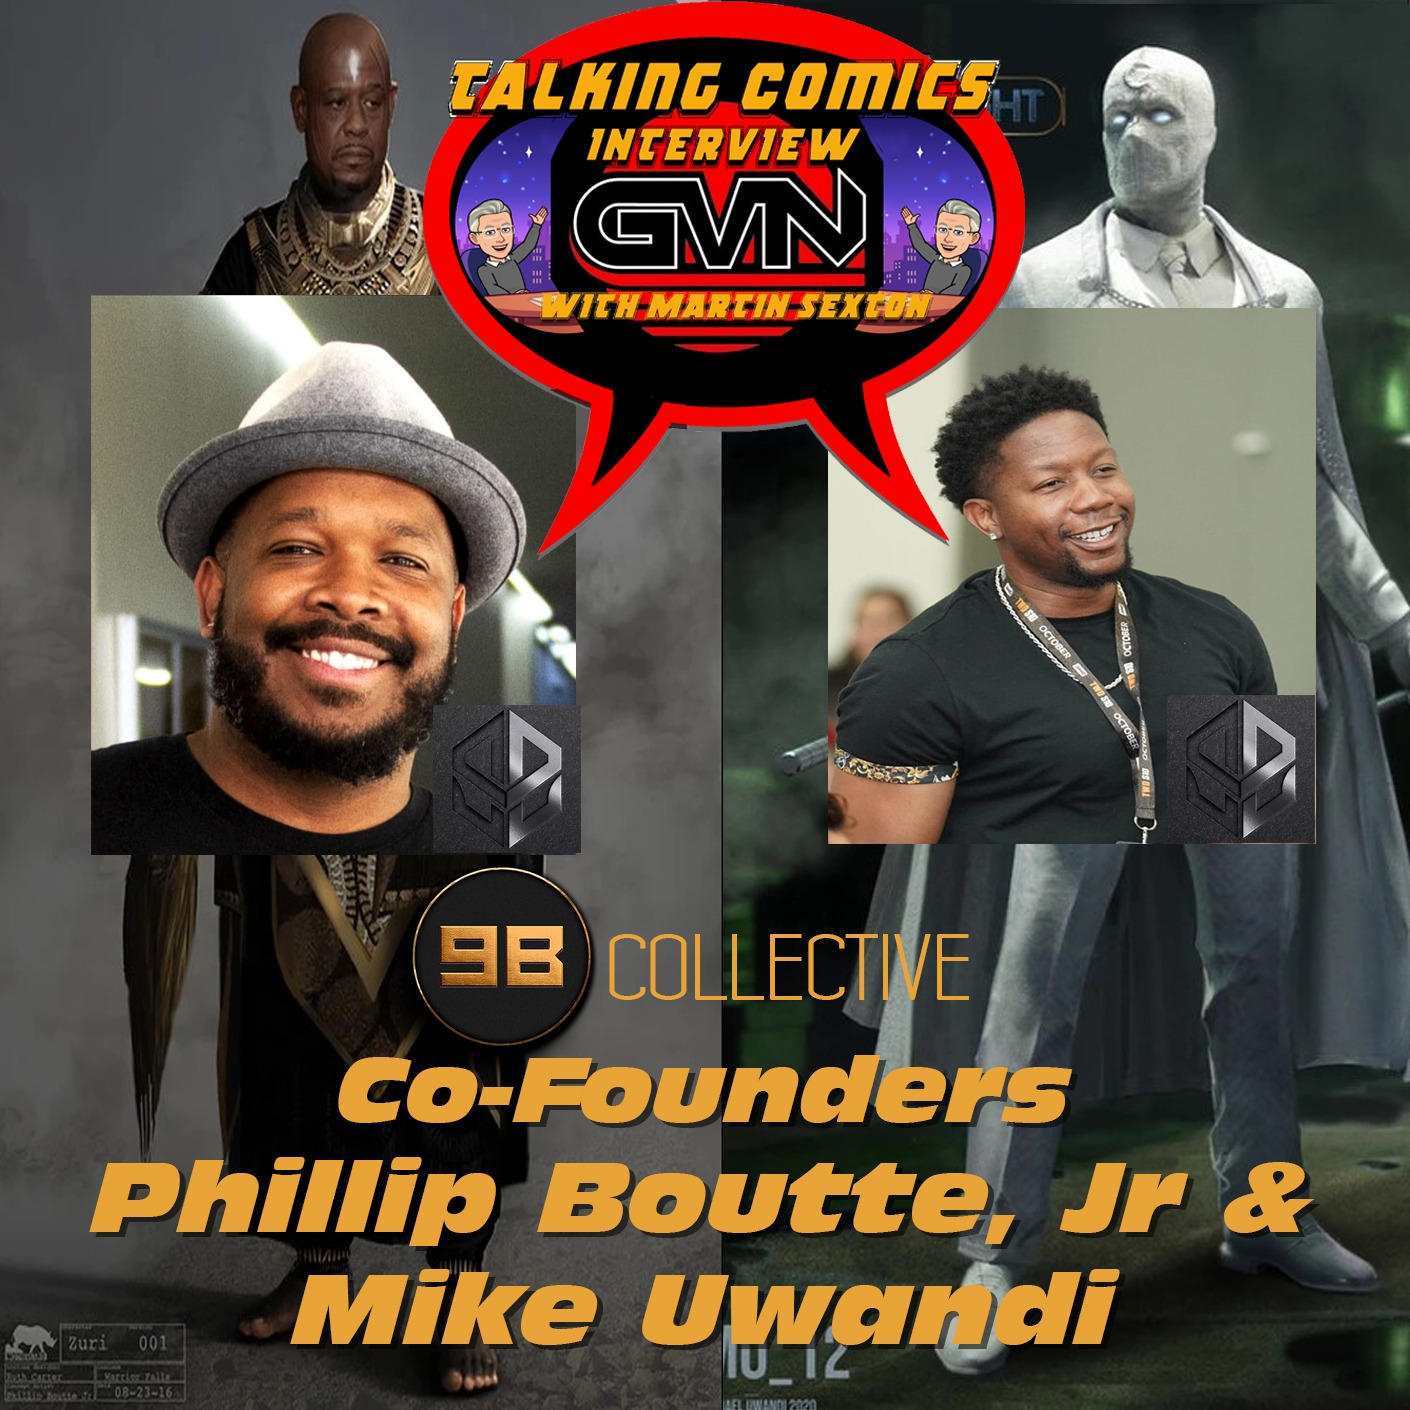 GVN Talking Comics Interview With 9B Collective's Phillip Boutte Jr. & Mike Uwandi